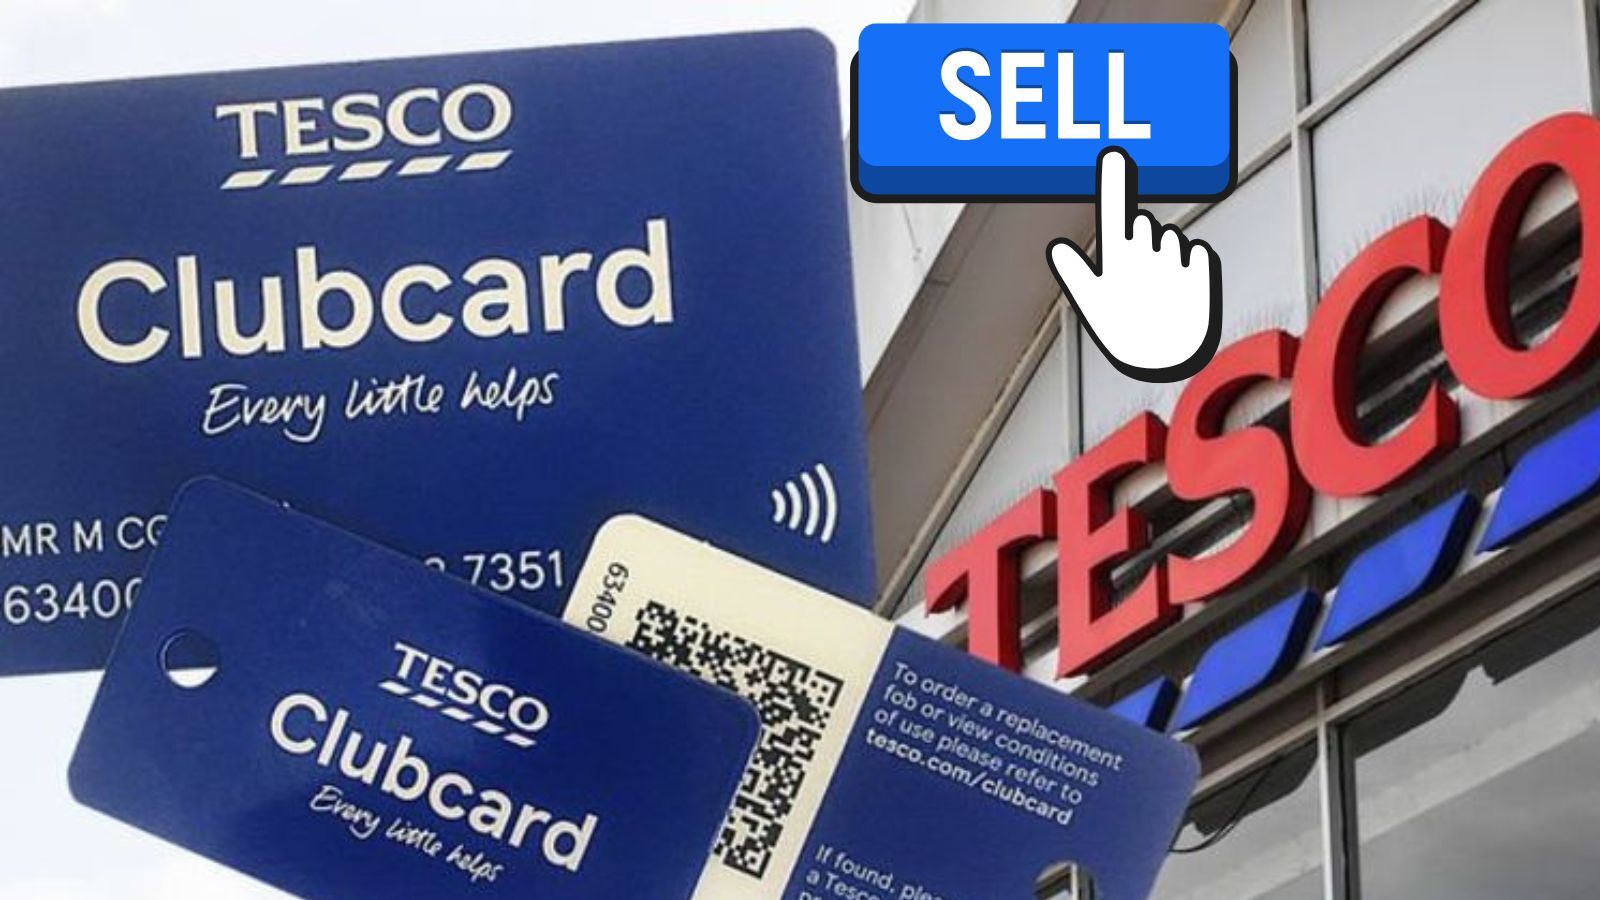 Does Tesco Express Sell Gift Cards? (All You Need to Know)